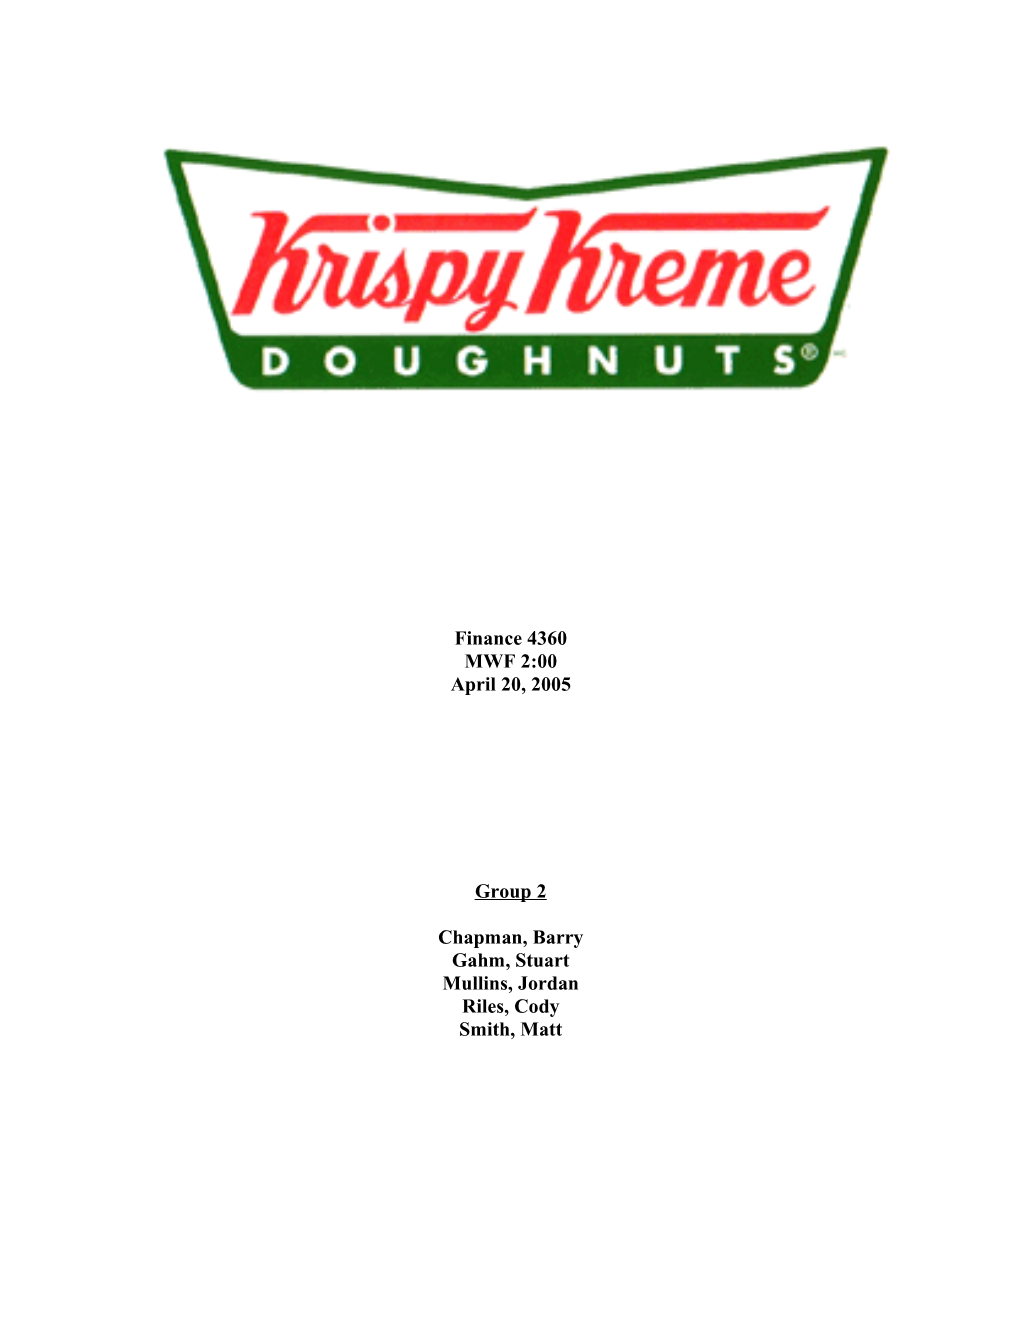 Krispy Kreme Faces a Multitude of Problems Stemming from Among Other Things, Poor Management